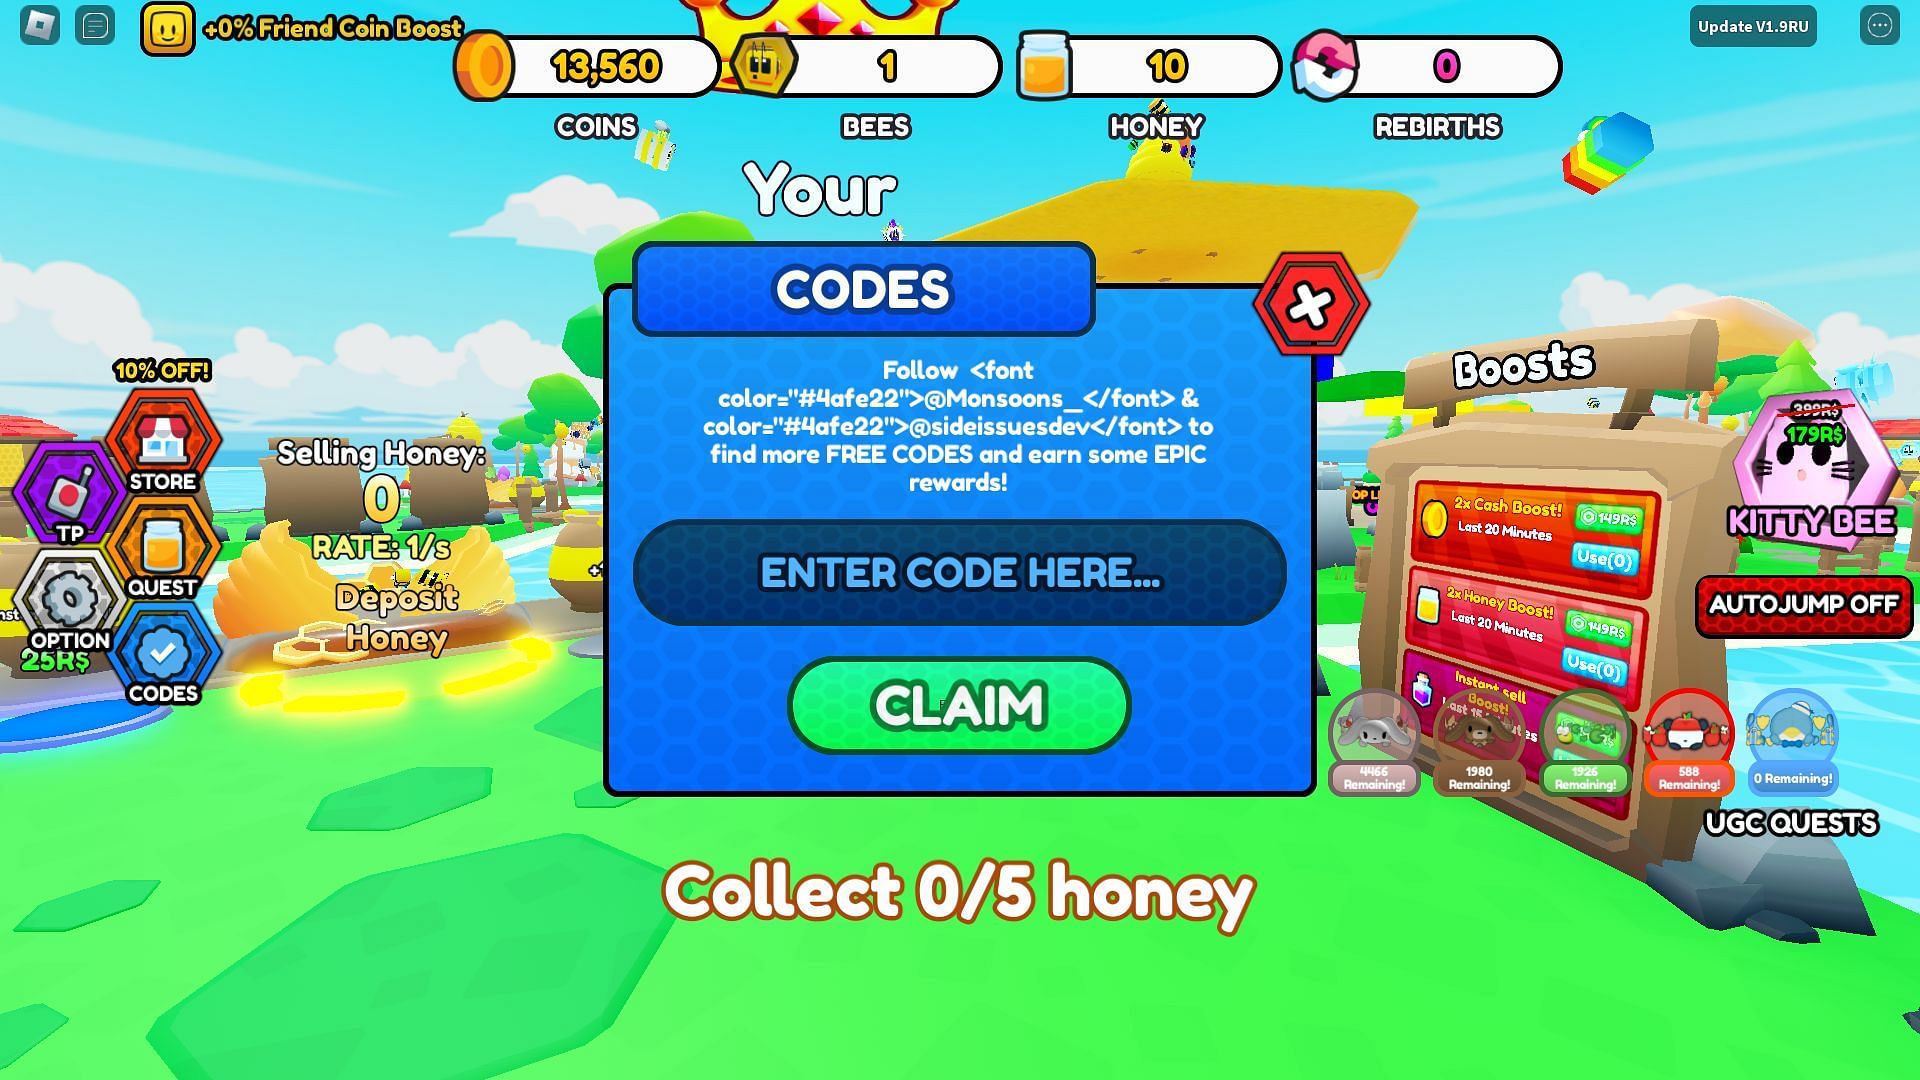 Active codes for Bee Factory (Image via Roblox)